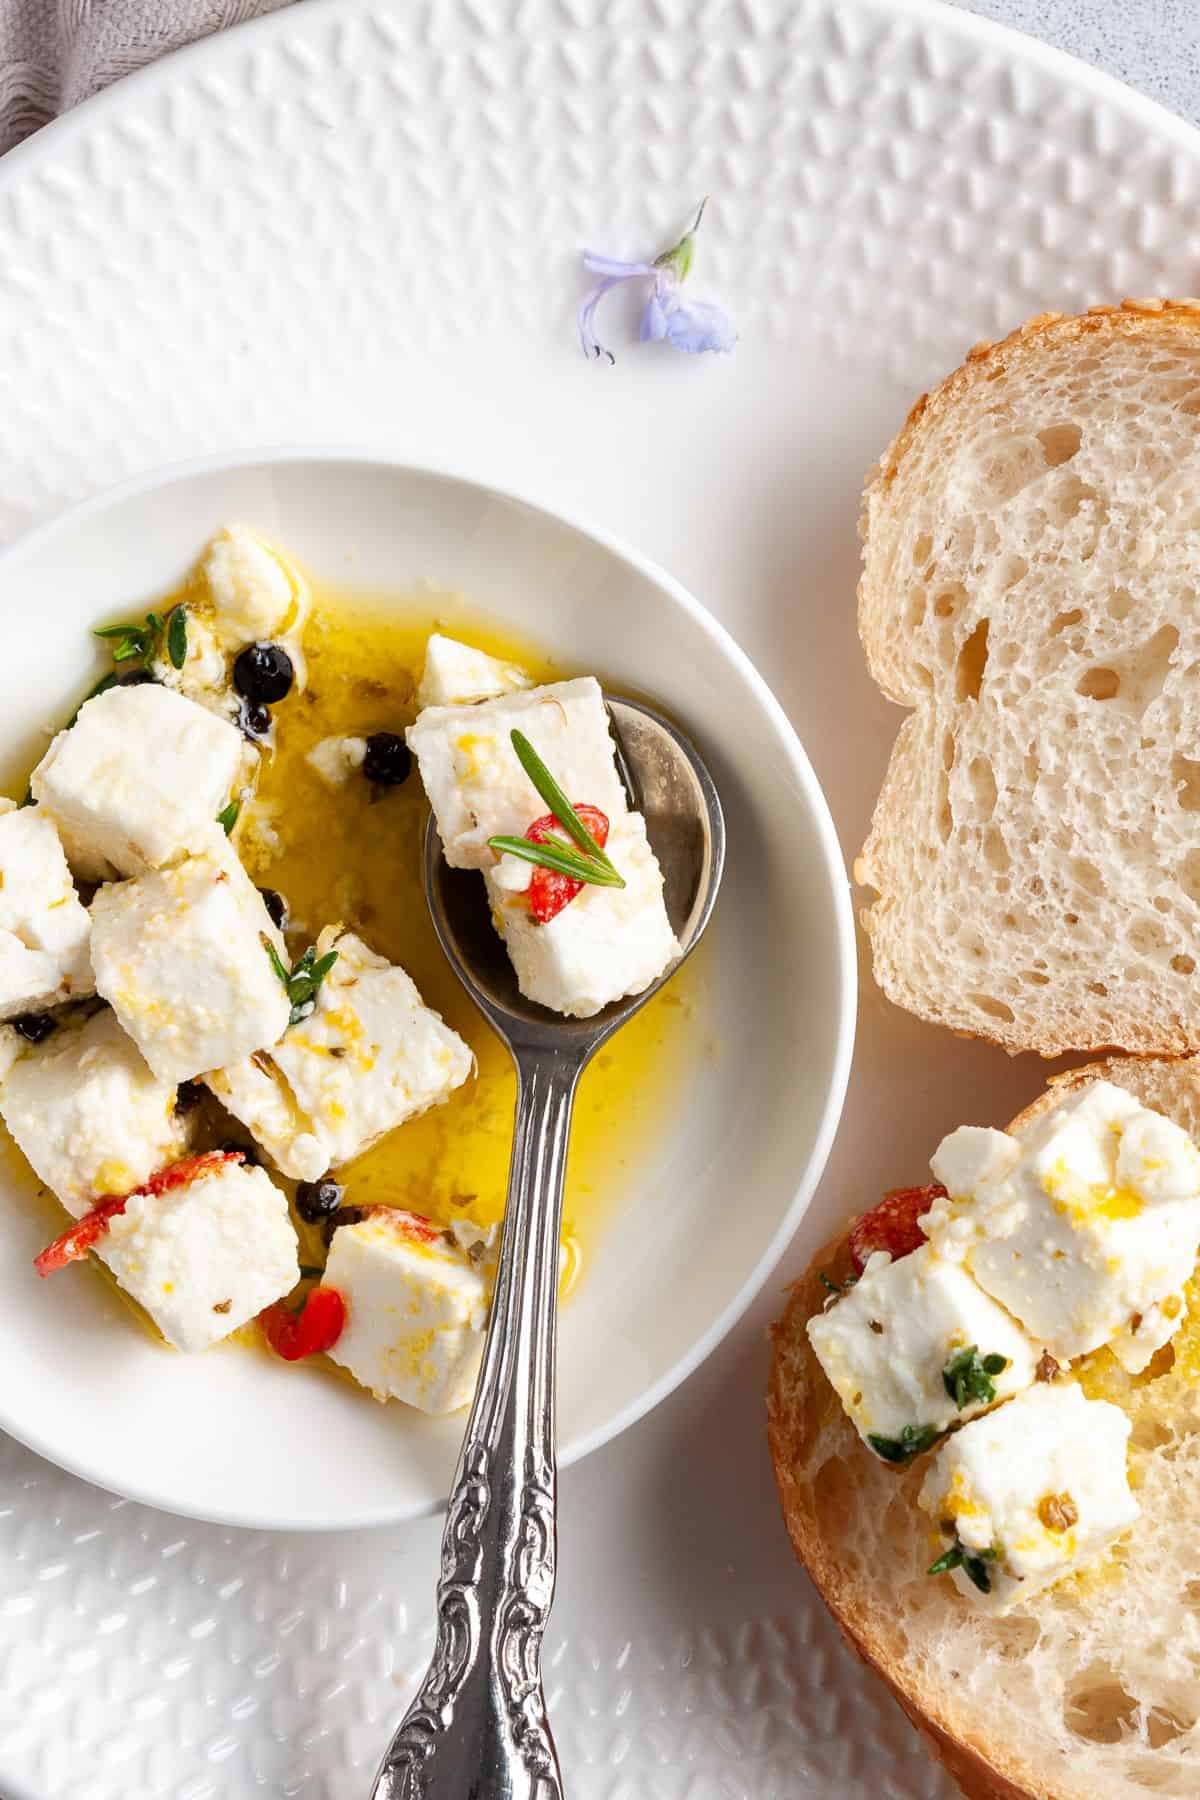 Small white plate with serving of feta, with a silver spoon scooping a piece of feta.